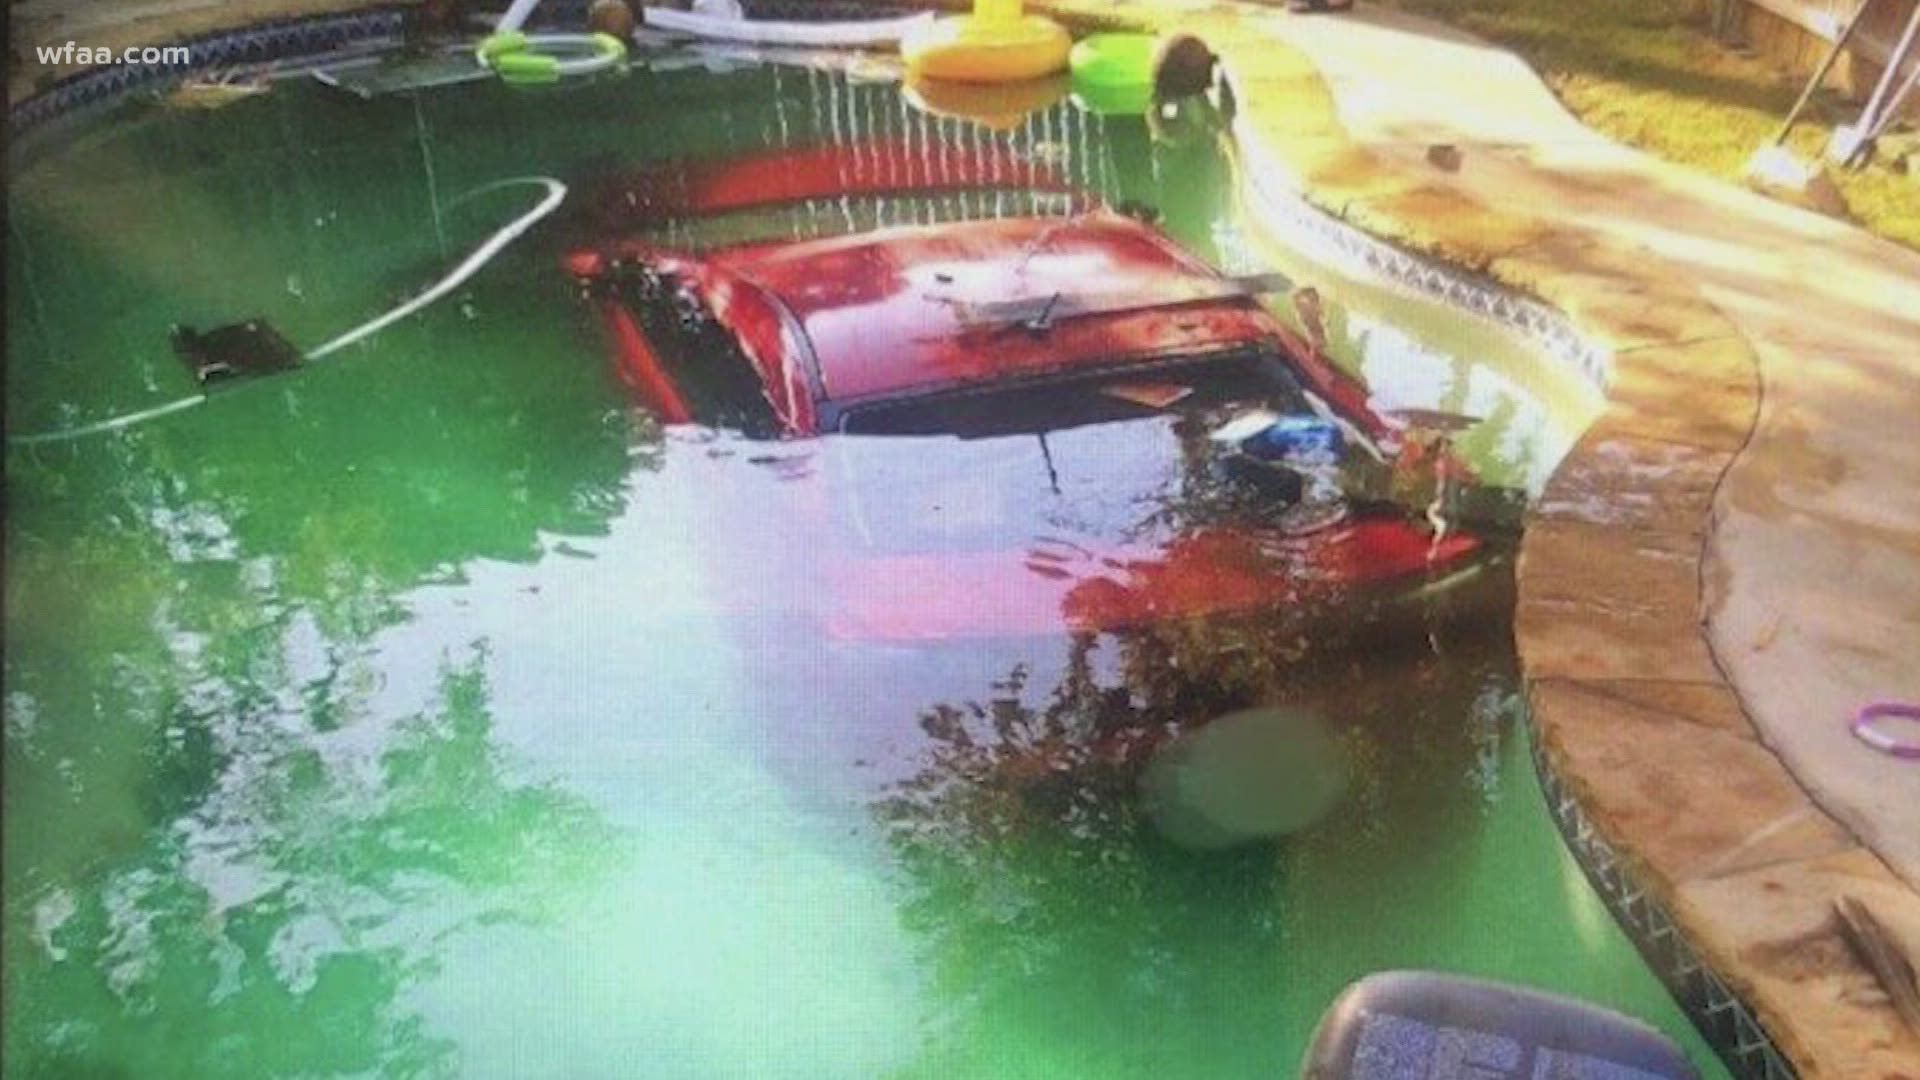 A suspected drunk driver crashed into an Arlington family’s swimming pool minutes before they got into the water.